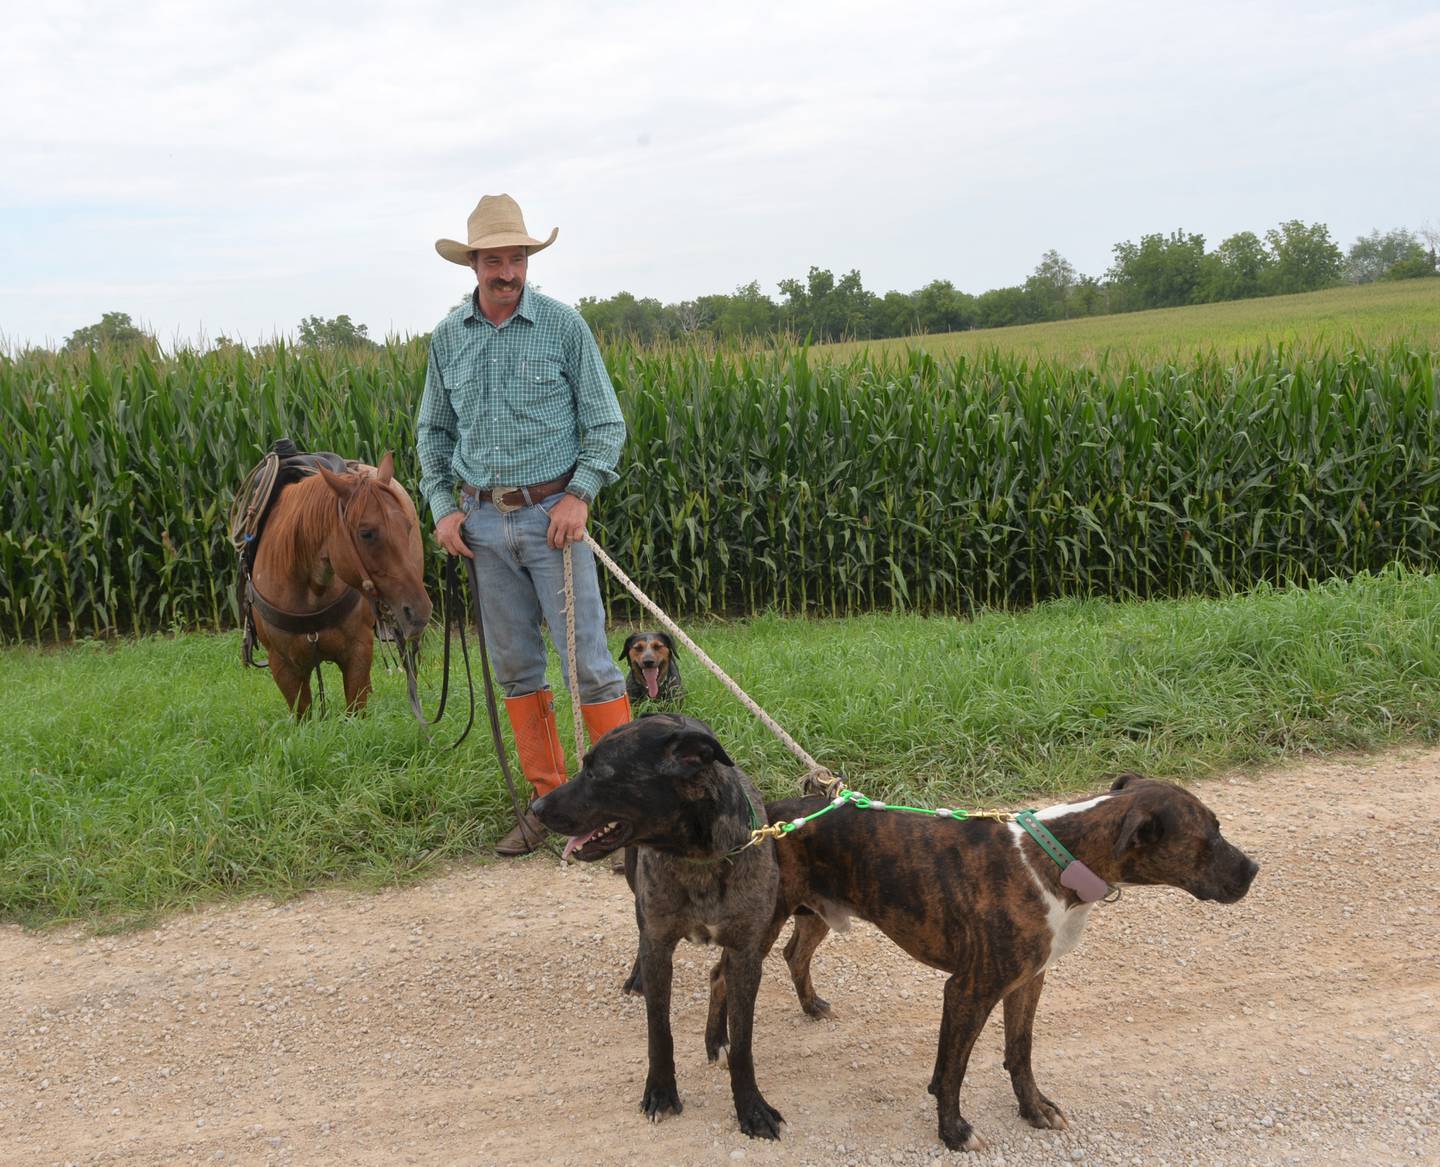 Wesley Bush stands with his one of his horses, Willy,  and three of his dogs Hank, Collar, and Lizzy, near his home on Capp Road, northeast of Morrison. Bush is the owner/operator of 2B Cattle Catching Services.